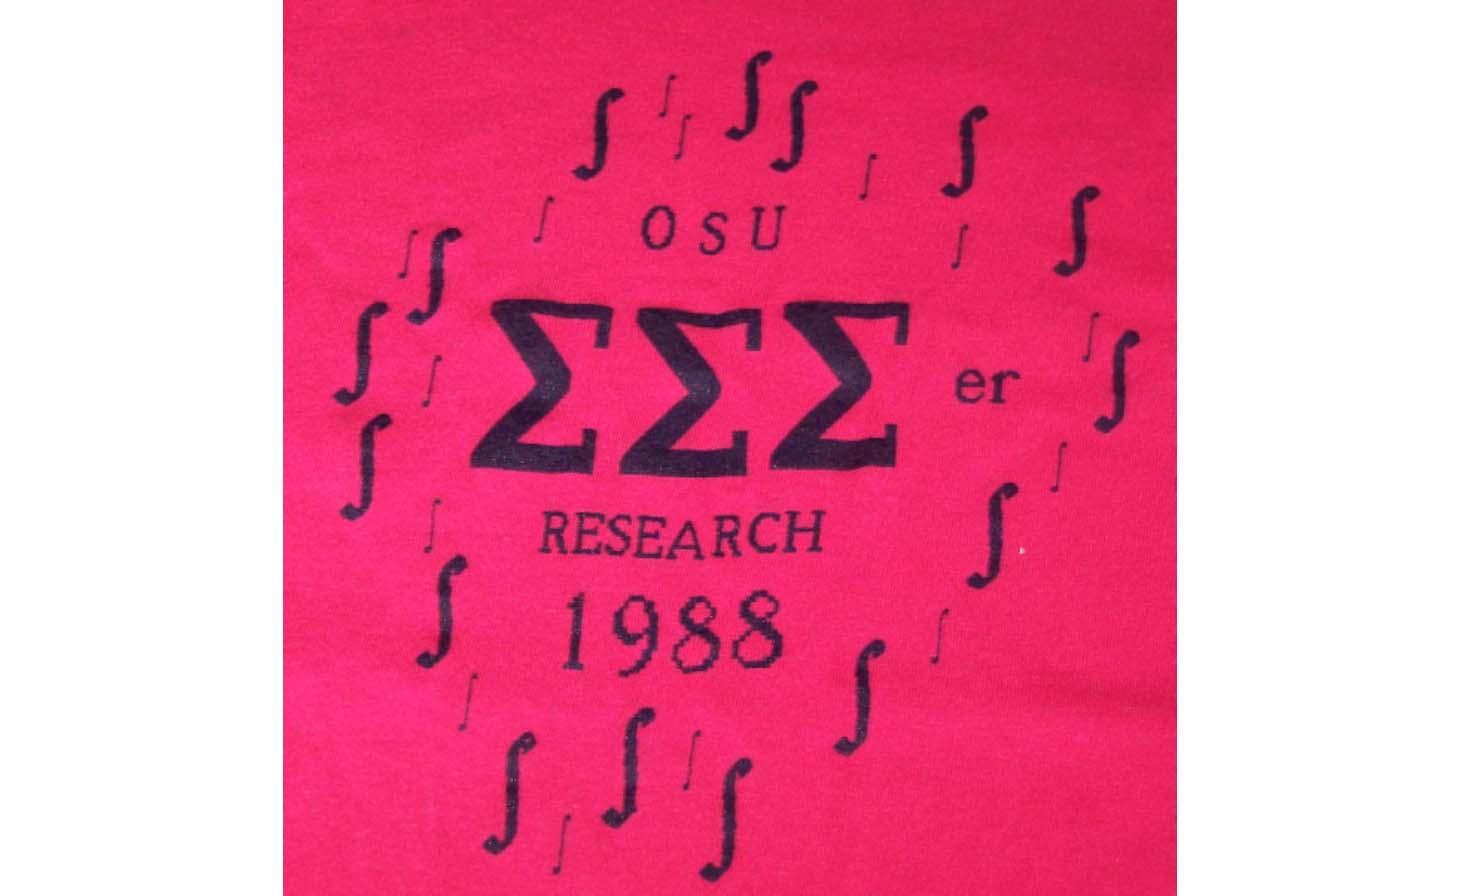 The back image of the OSU REU t shirt in 1988.